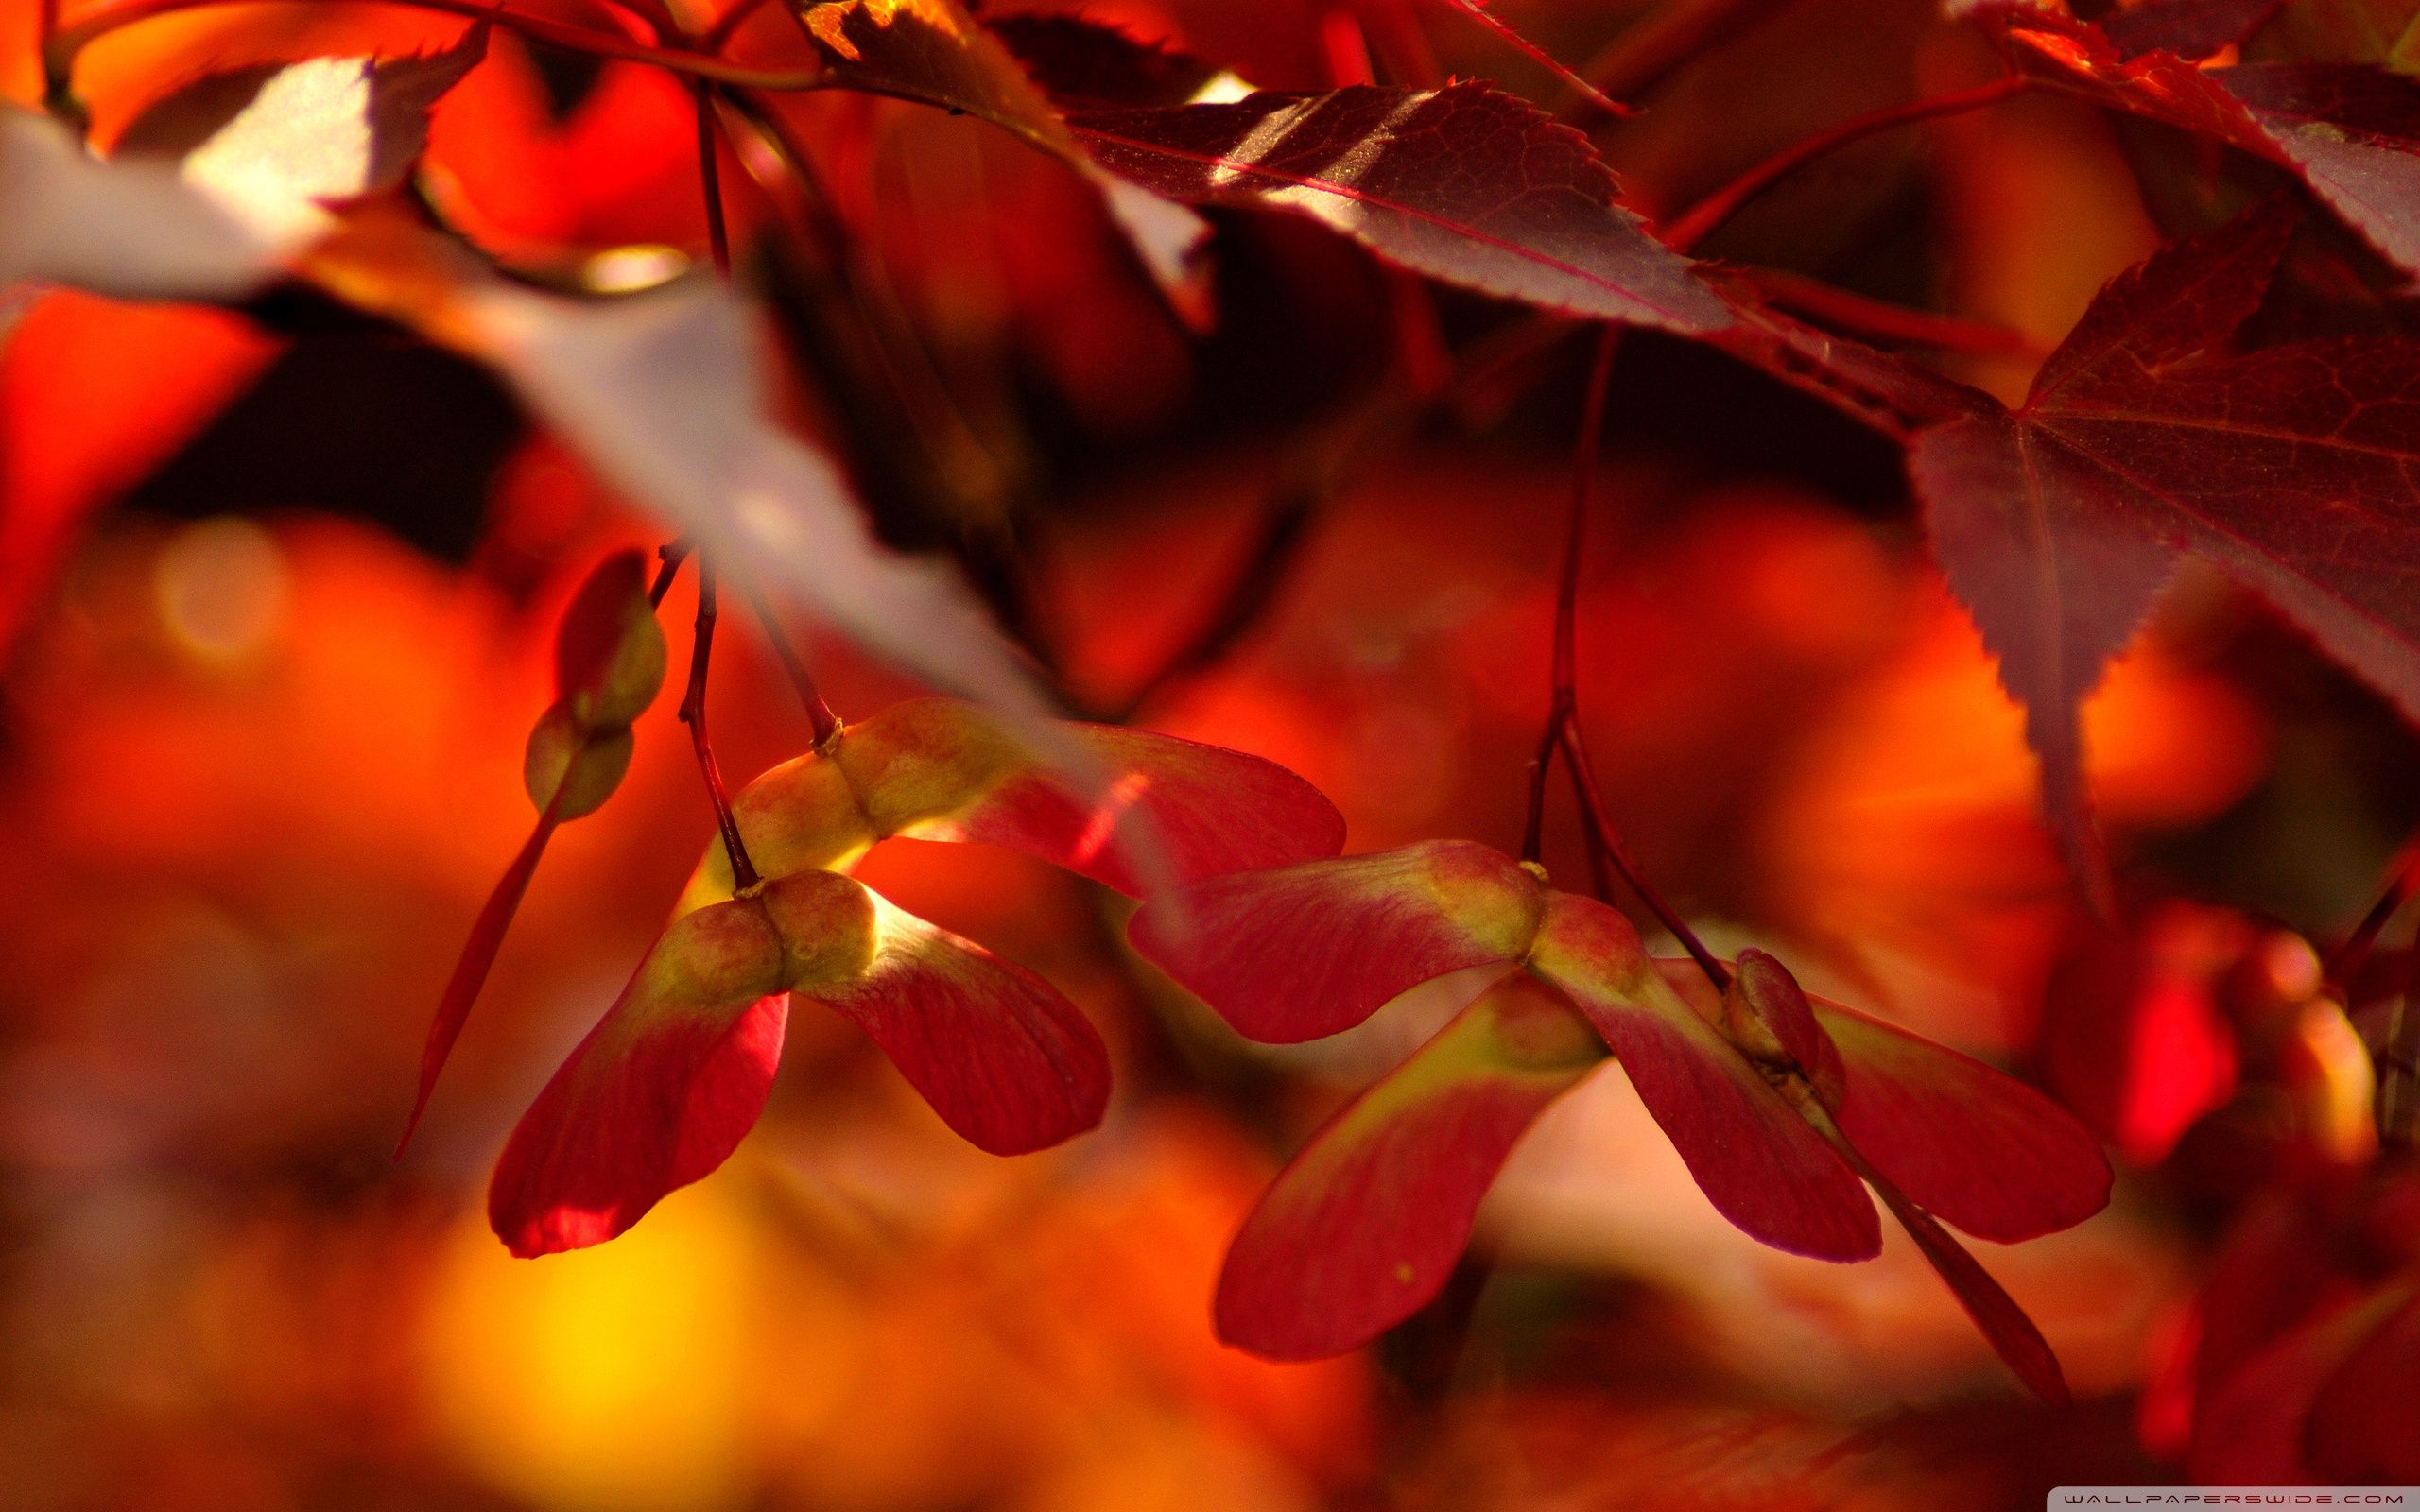 Red Autumn Leaves, Close Up Ultra HD Desktop Background Wallpaper for 4K UHD TV, Multi Display, Dual Monitor, Tablet